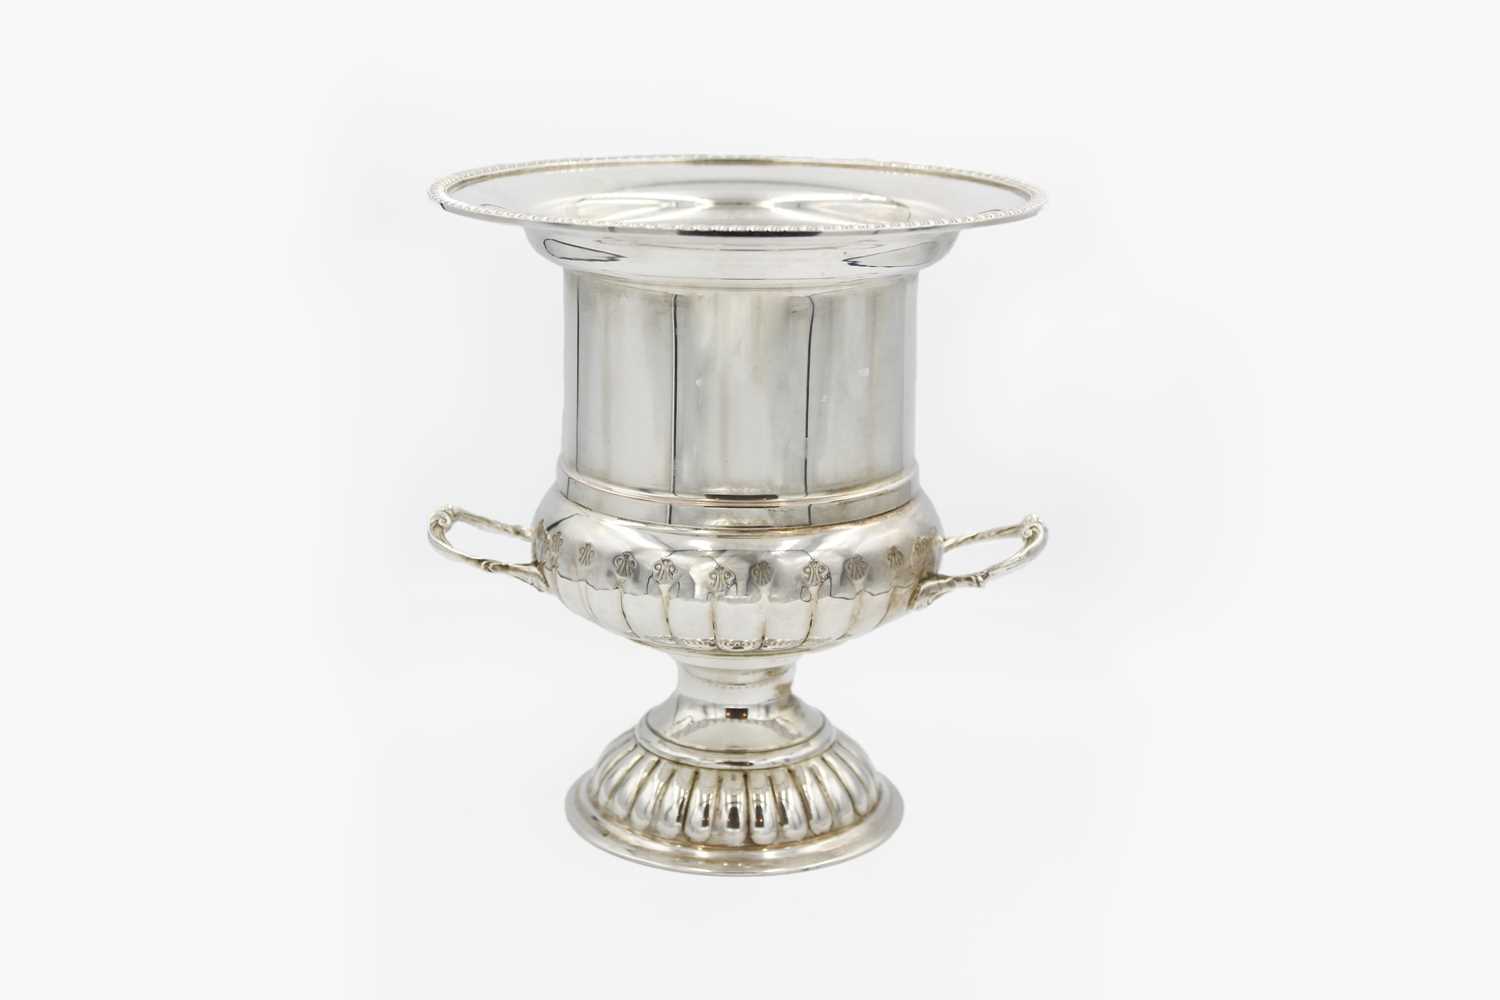 A silver on copper Campana form wine cooler with lift out compartment.